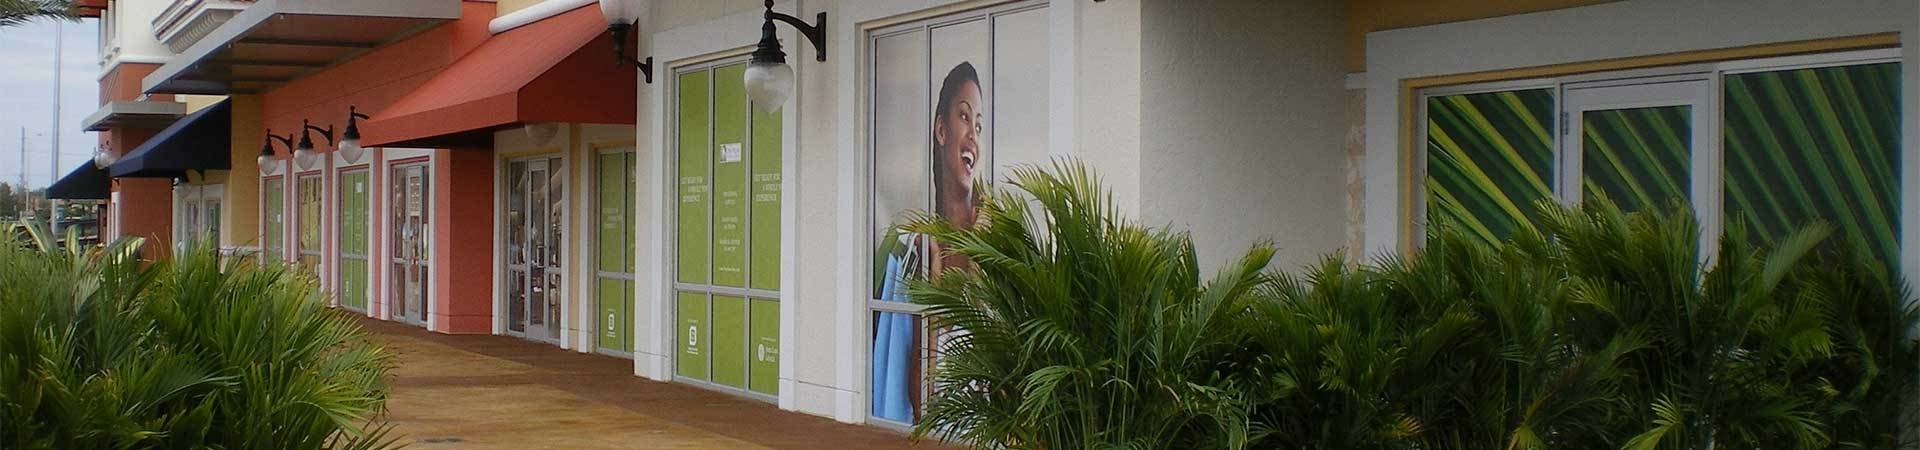 Outdoor adhesive wall graphics promoting retail stores.